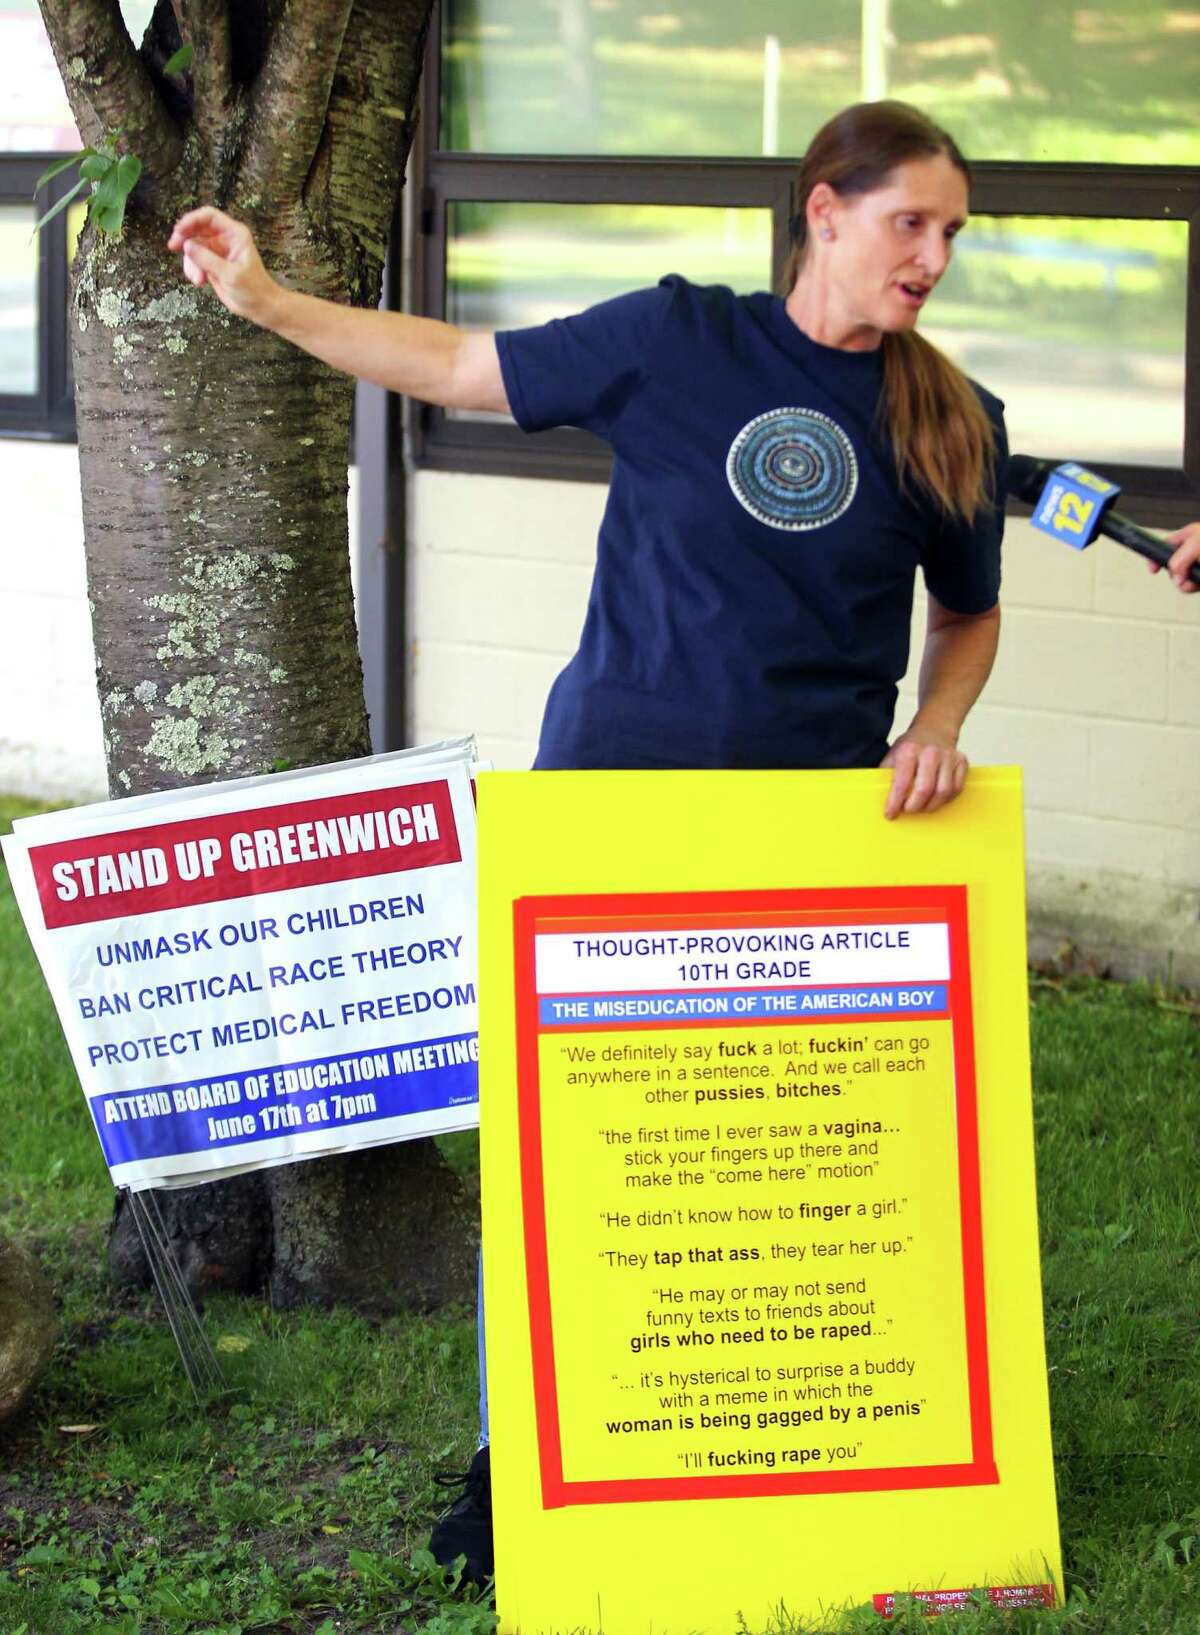 Jackie Homan, organizer of Greenwich Patriots speaks to the media before attending a BOE meeting at Central Middle School in Greenwich, Conn., on Thursday June 17, 2021. Members are urging people to attend and speak at public comment to protest masking, vaccinations for students and critical race theory.